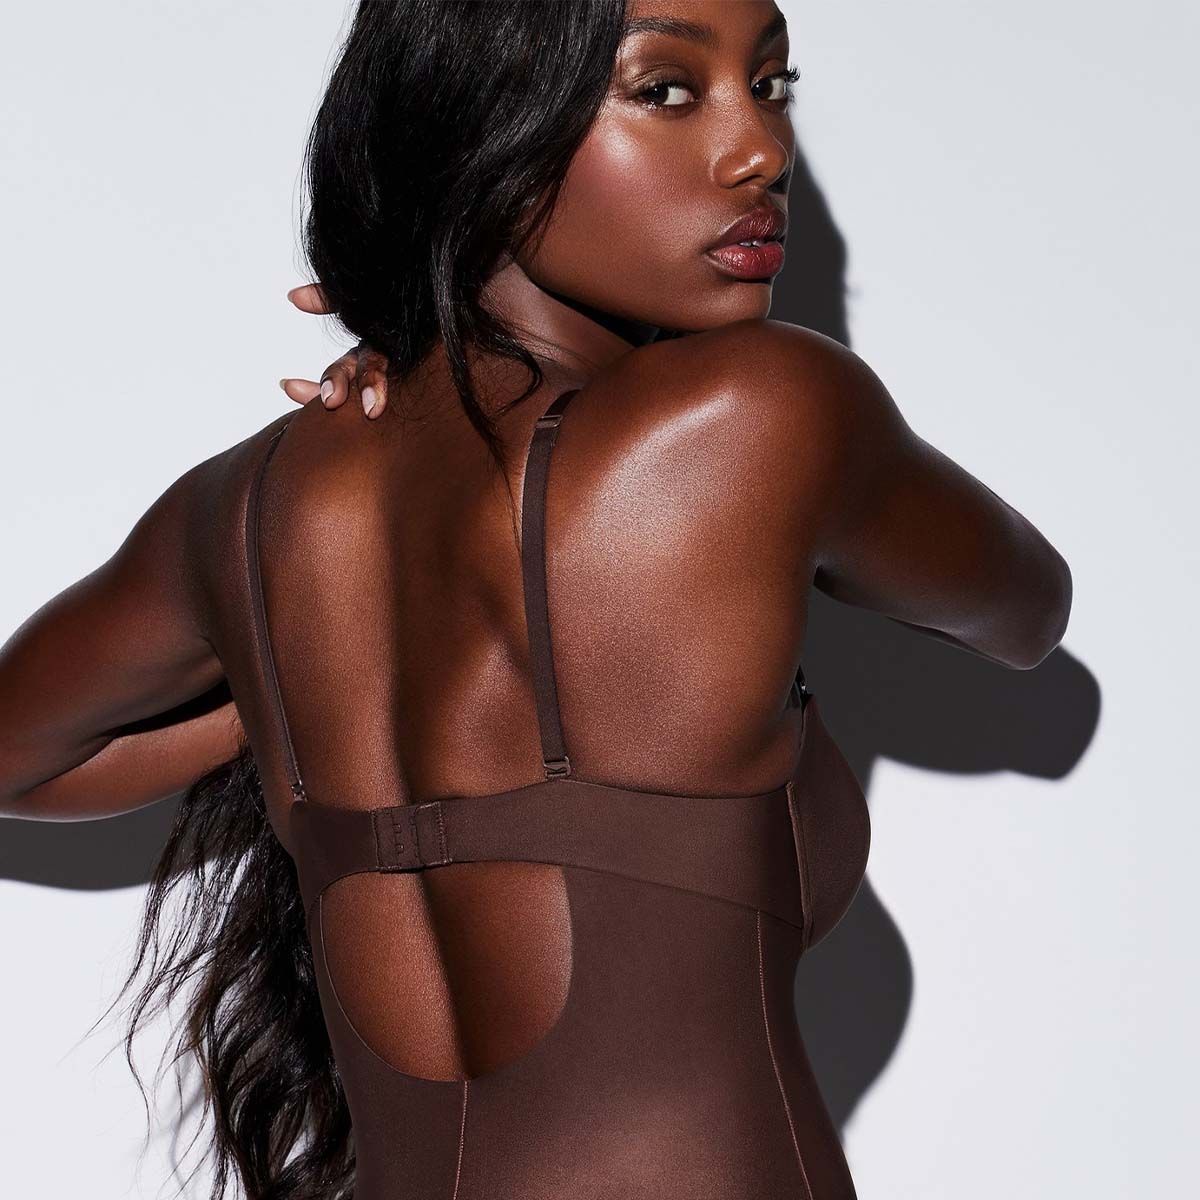 I'm obsessed with this shapewear that you can absolutely wear as a